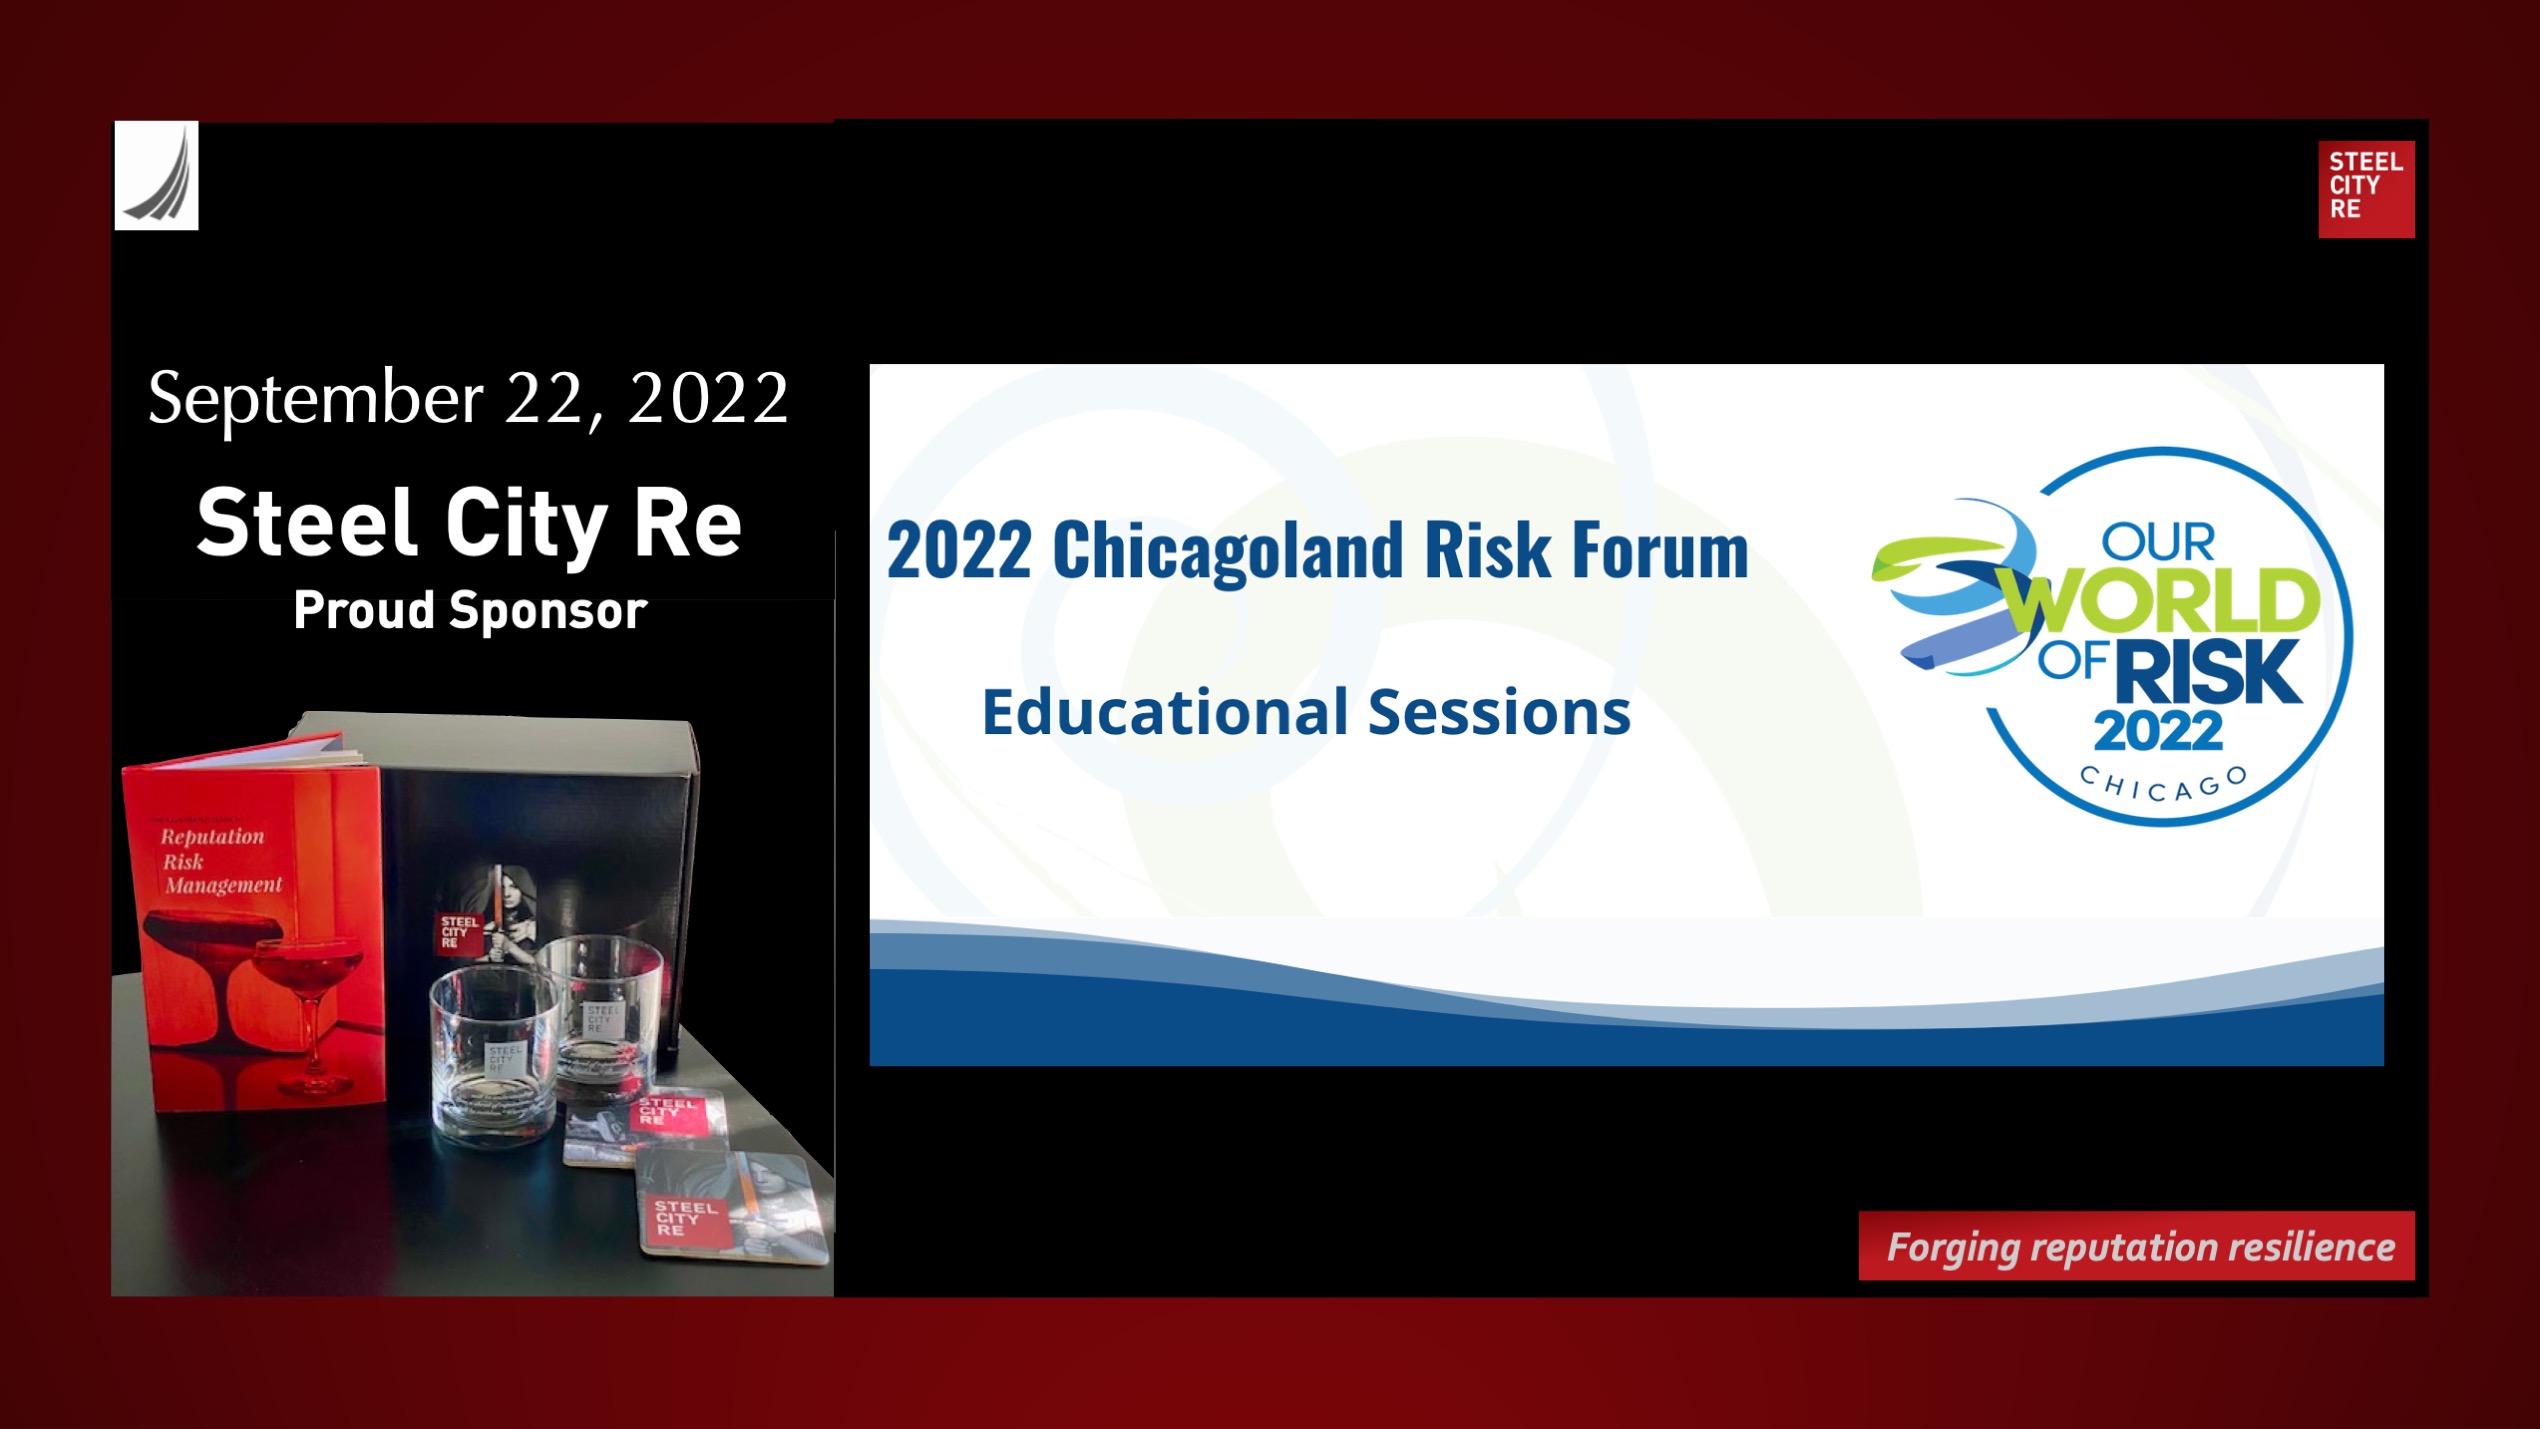 Chicago Risk Forum, 2022 aims to be the premier event for the Chicago RIMS Chapter | engaging, industry leading educational opportunities.